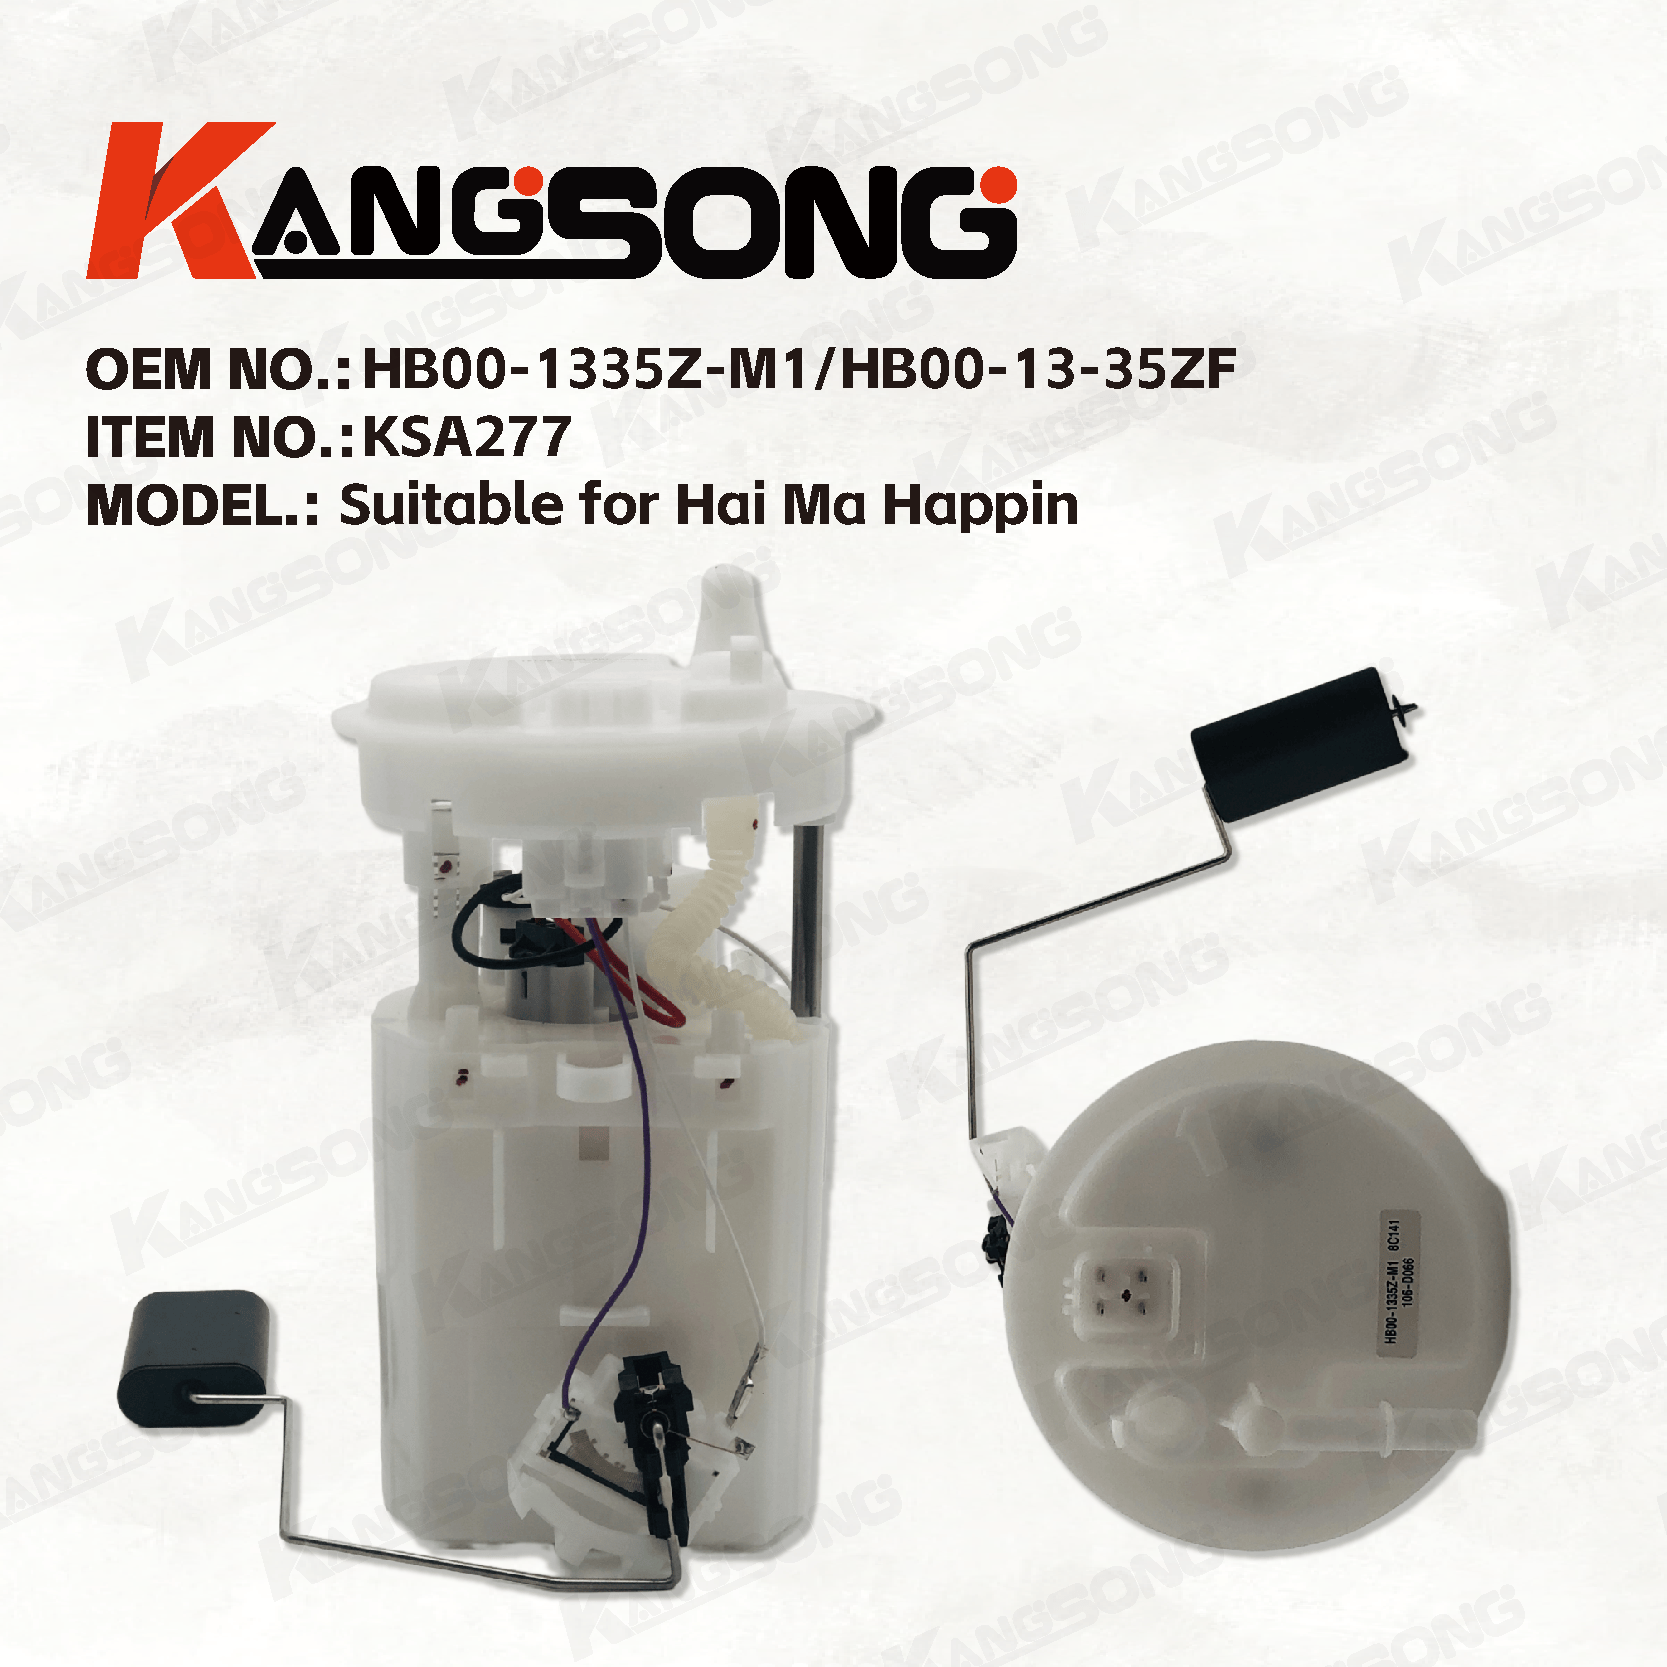 High performance electric engine fuel pump/HB00-1335Z-M1 HB00-13-35ZF HB00-13-35ZM1 HB00-1335Z-M2 /Fuel Pump Module Assembly for Hai Ma Family 2